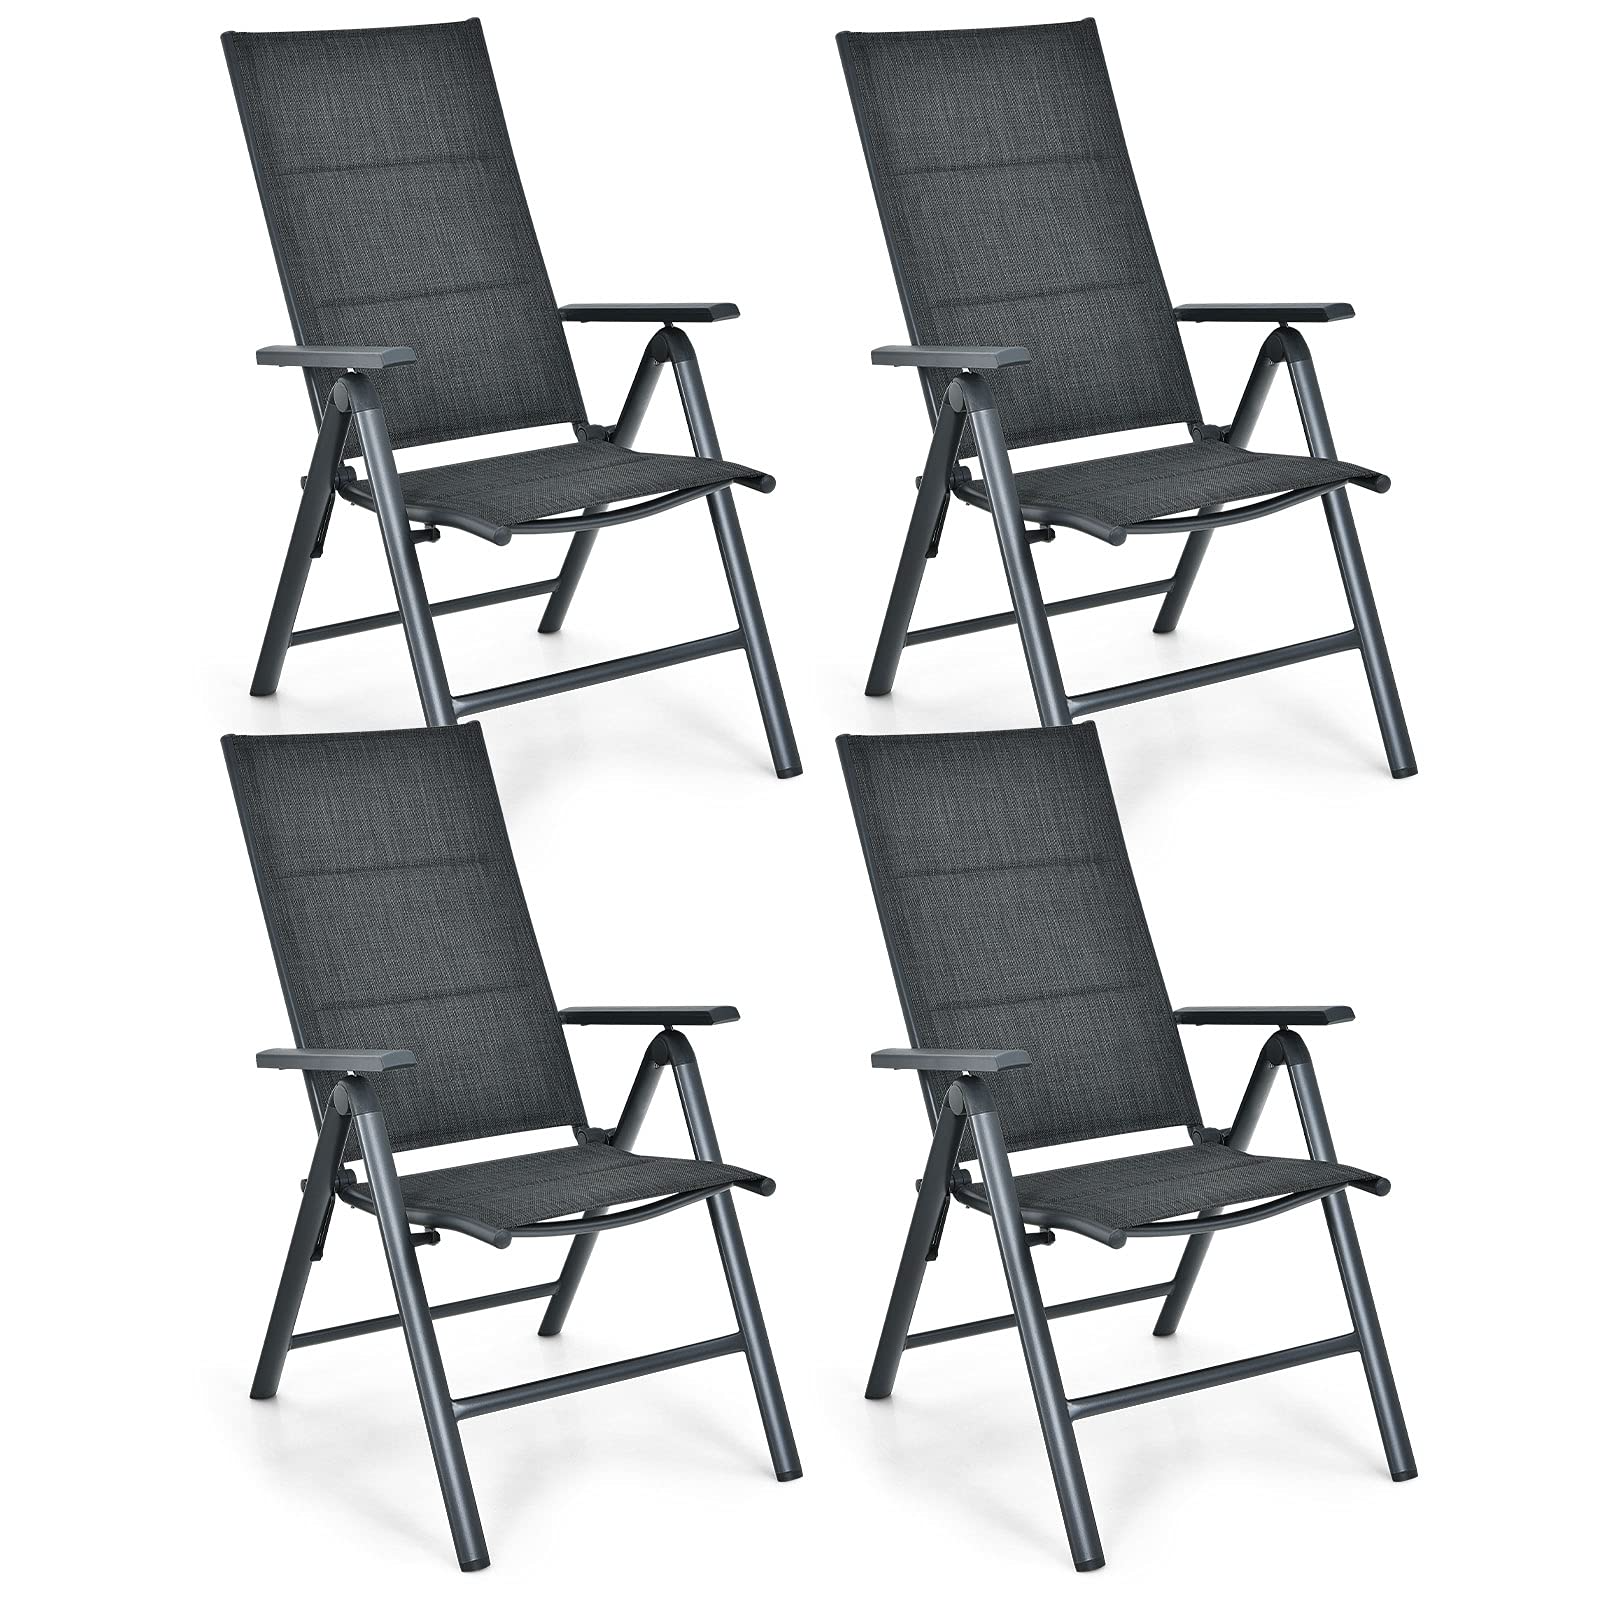 Giantex Padded Lawn Chairs 7 Positions Adjustable Backrest Aluminum Frame